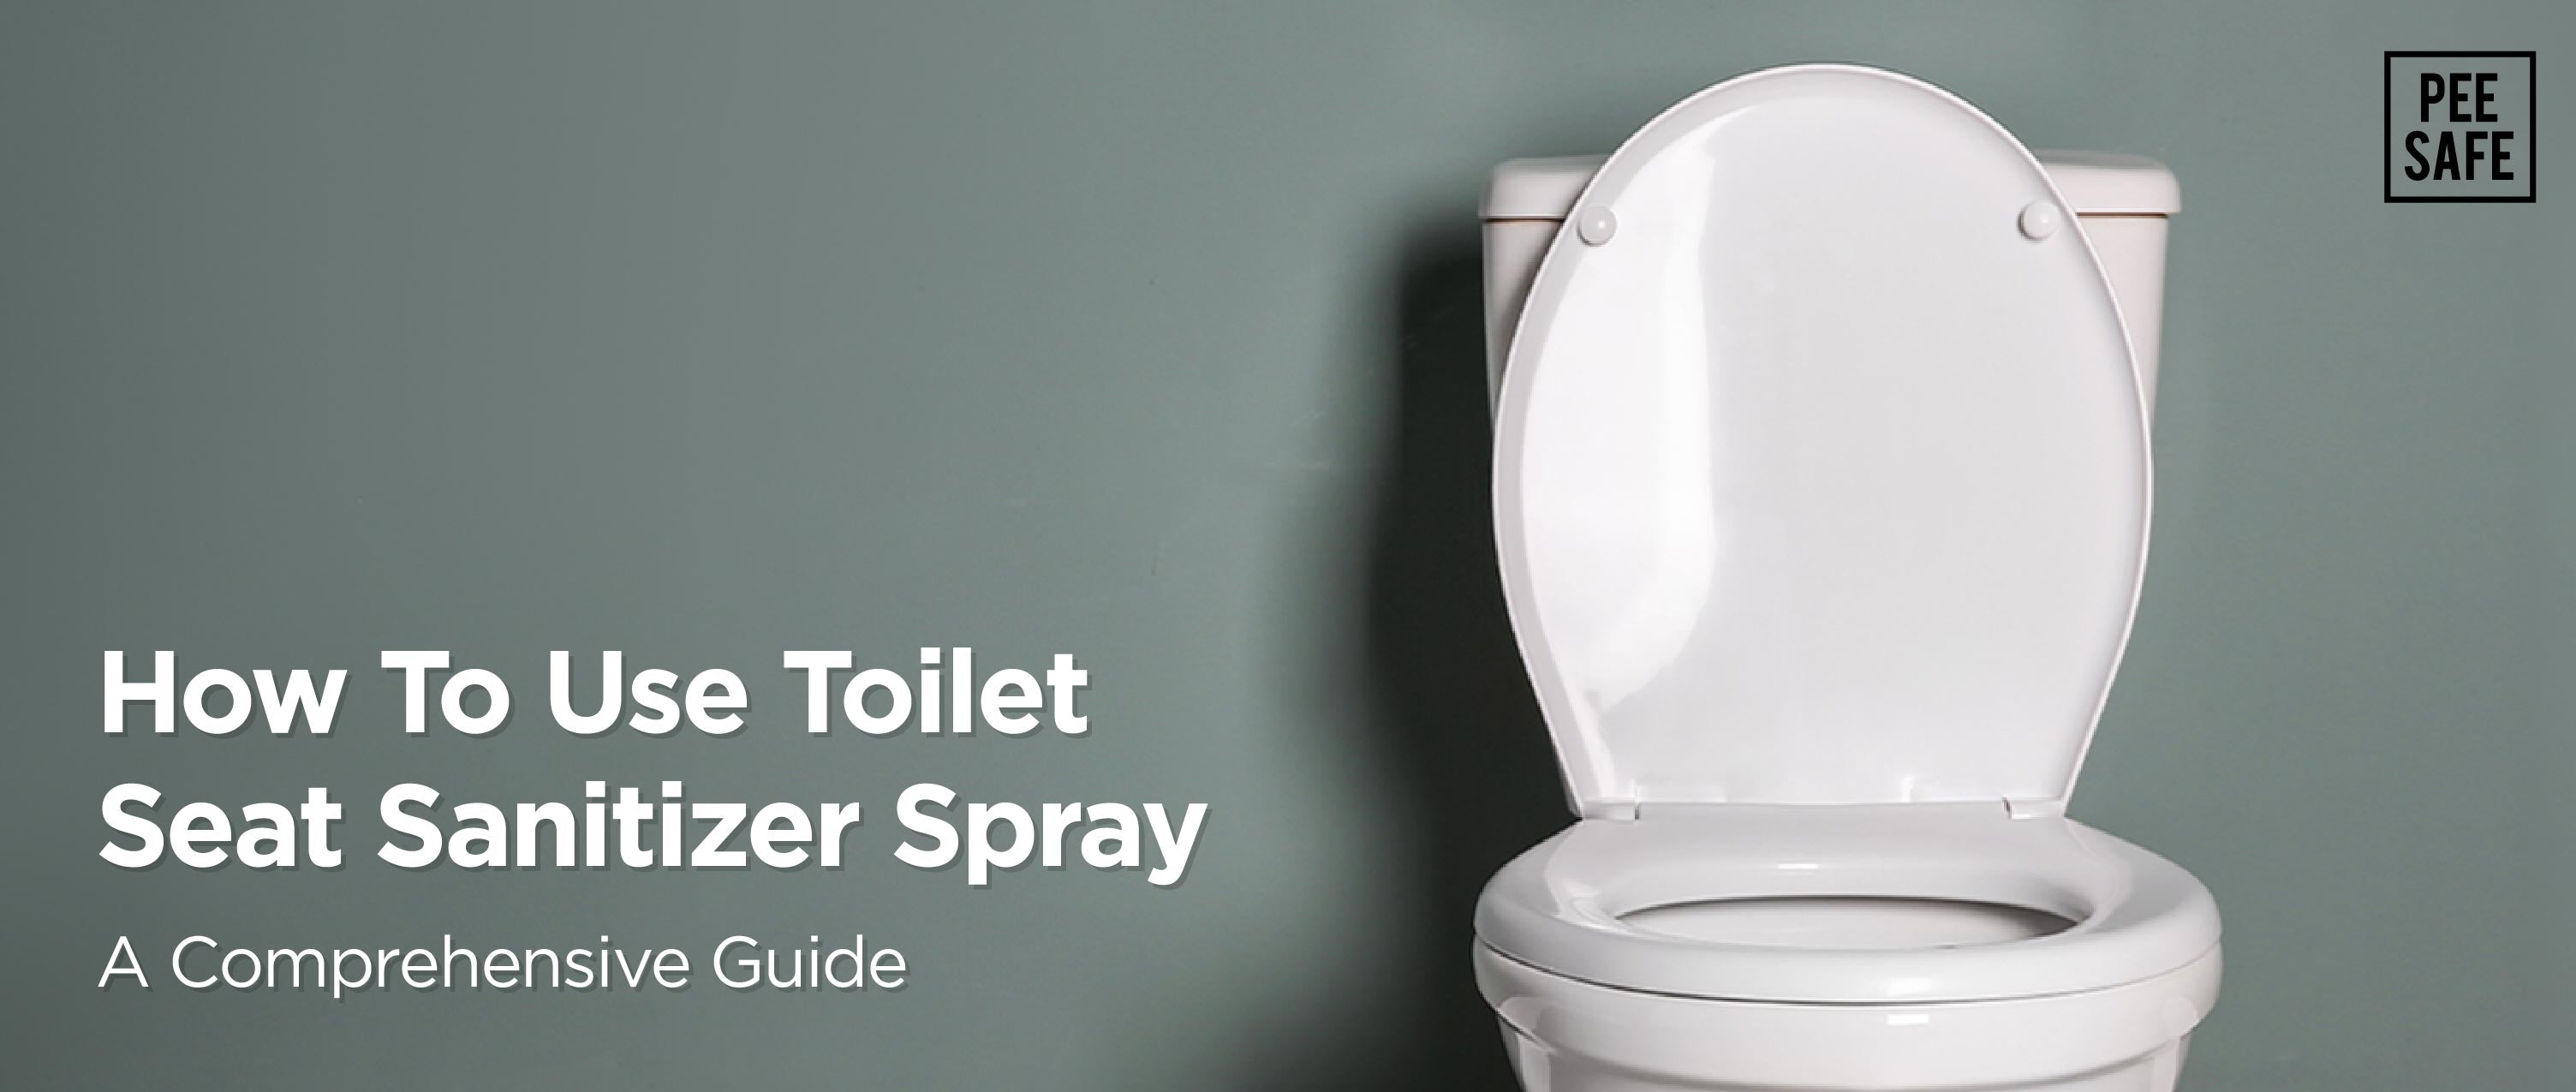 How To Use Toilet Seat Sanitizer Spray: A Comprehensive Guide